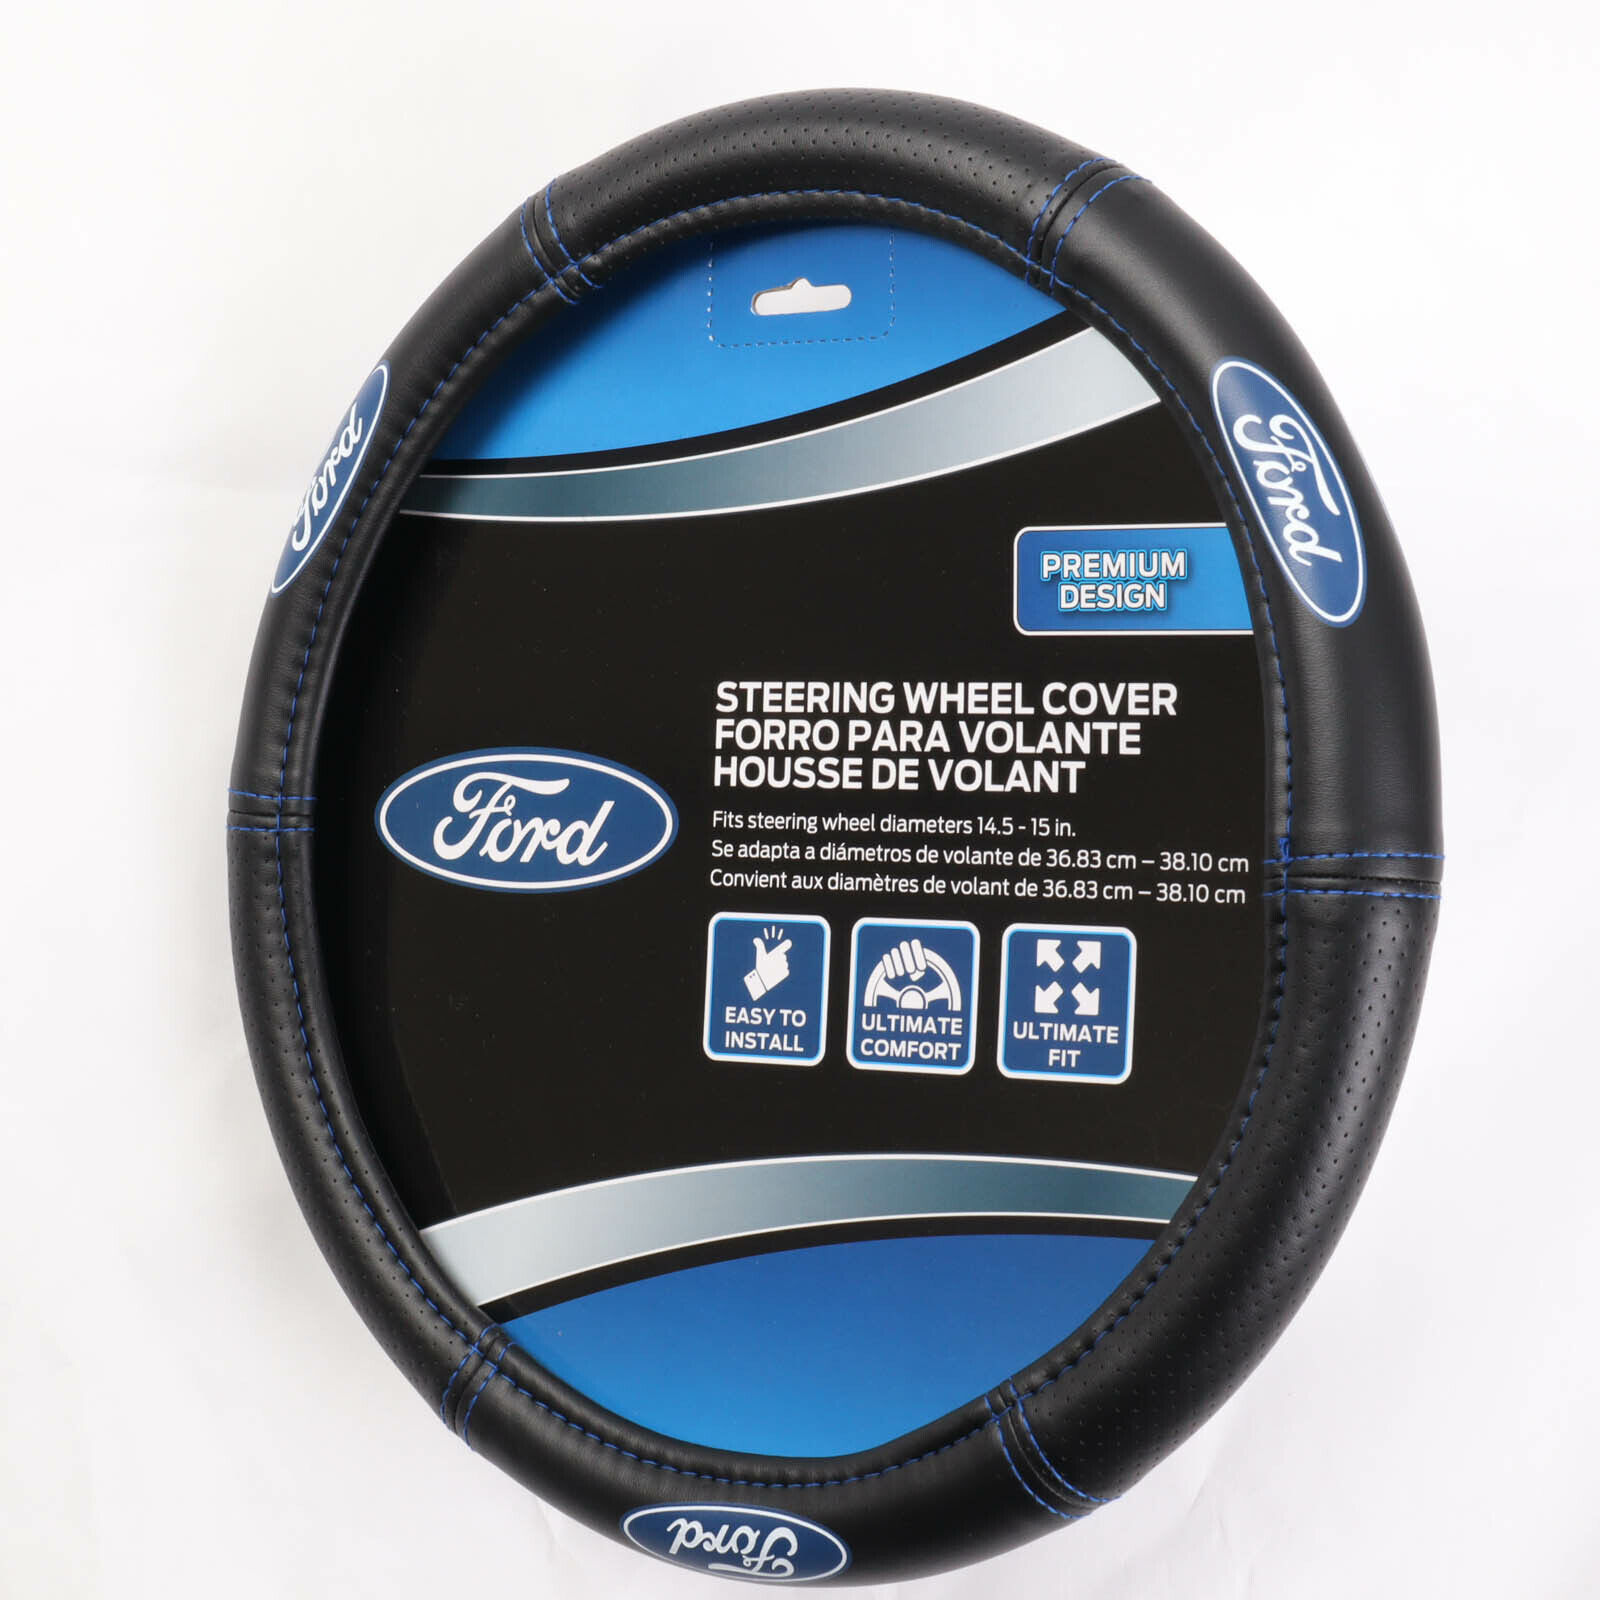 New FORD Synthetic Leather Car Truck Steering Wheel Cover - Official Licensed